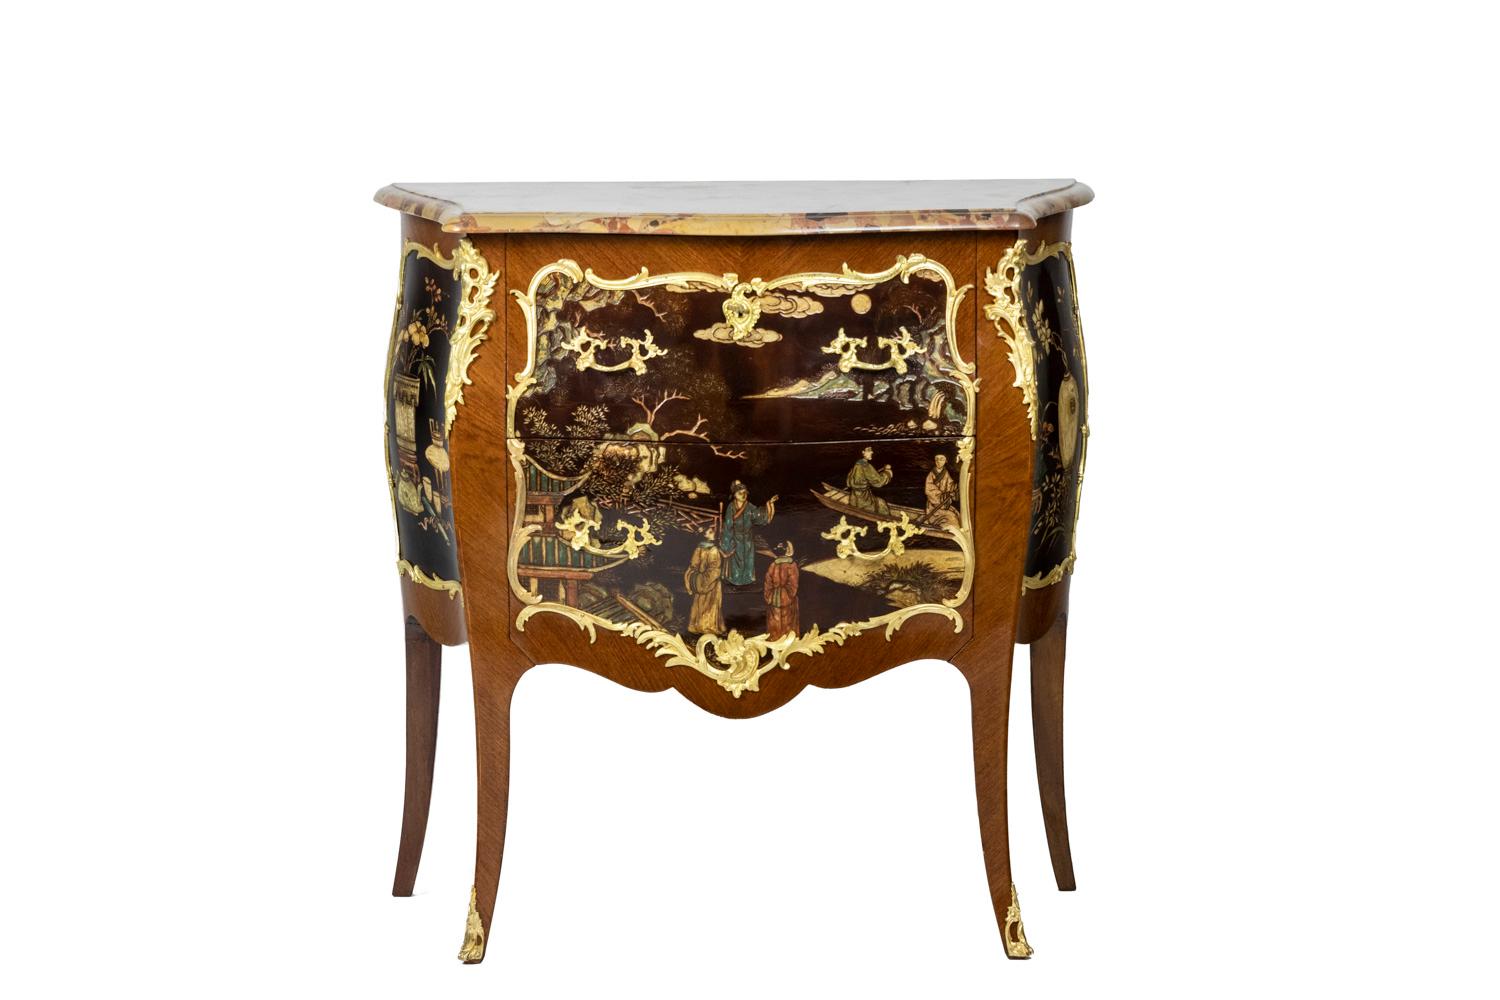 Chest of drawers in the Louis XV style, in veneer, lacquer and bronze. The Japanese-style lacquer decorations, in cartridges decorated with gilded and chiseled bronzes and in a fretted shape, the cartridge on the front ending in the lower part with